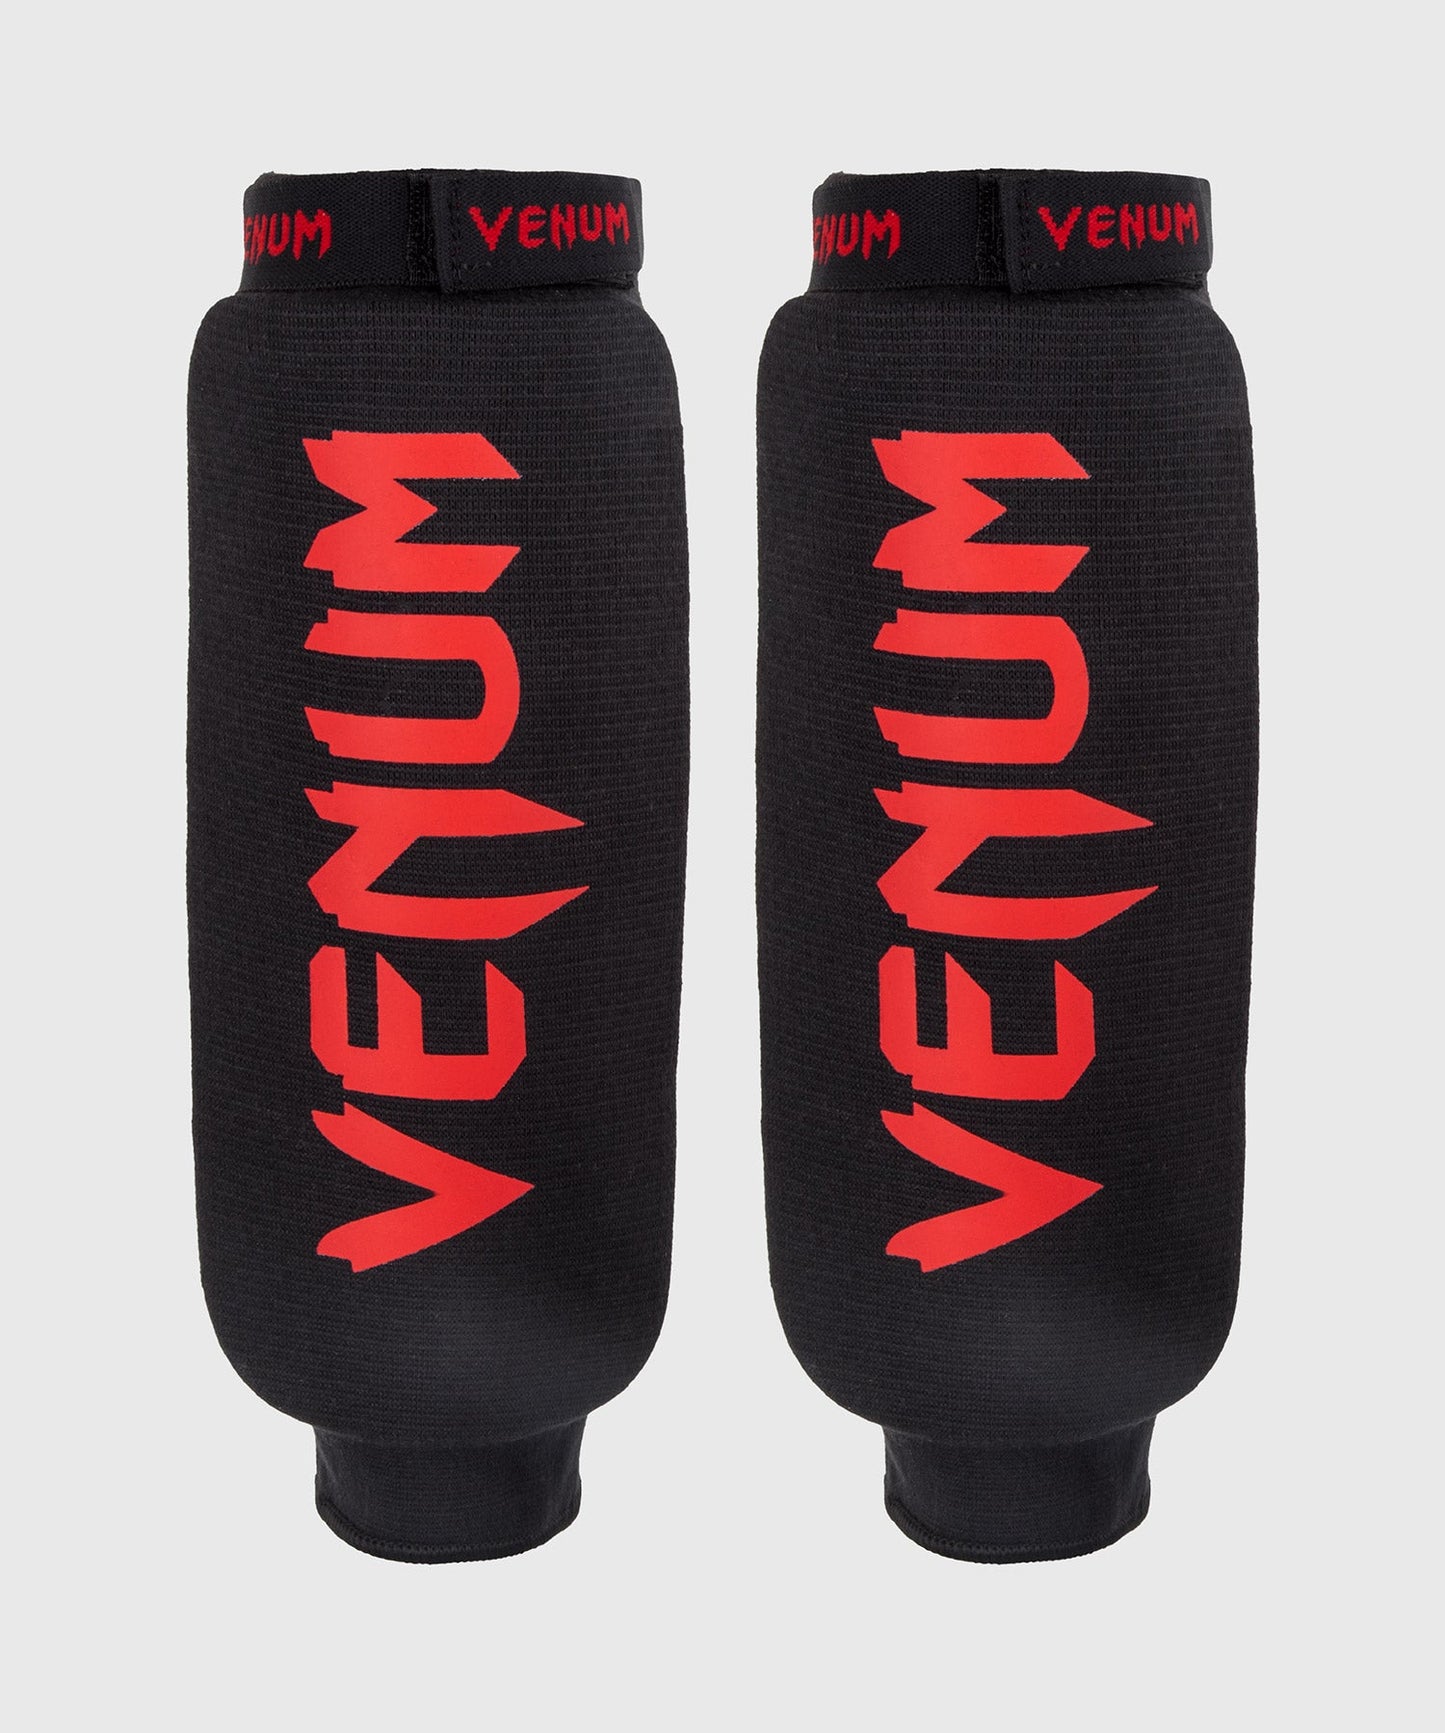 Venum Shin guards Kontact Without Foot - Black/Red